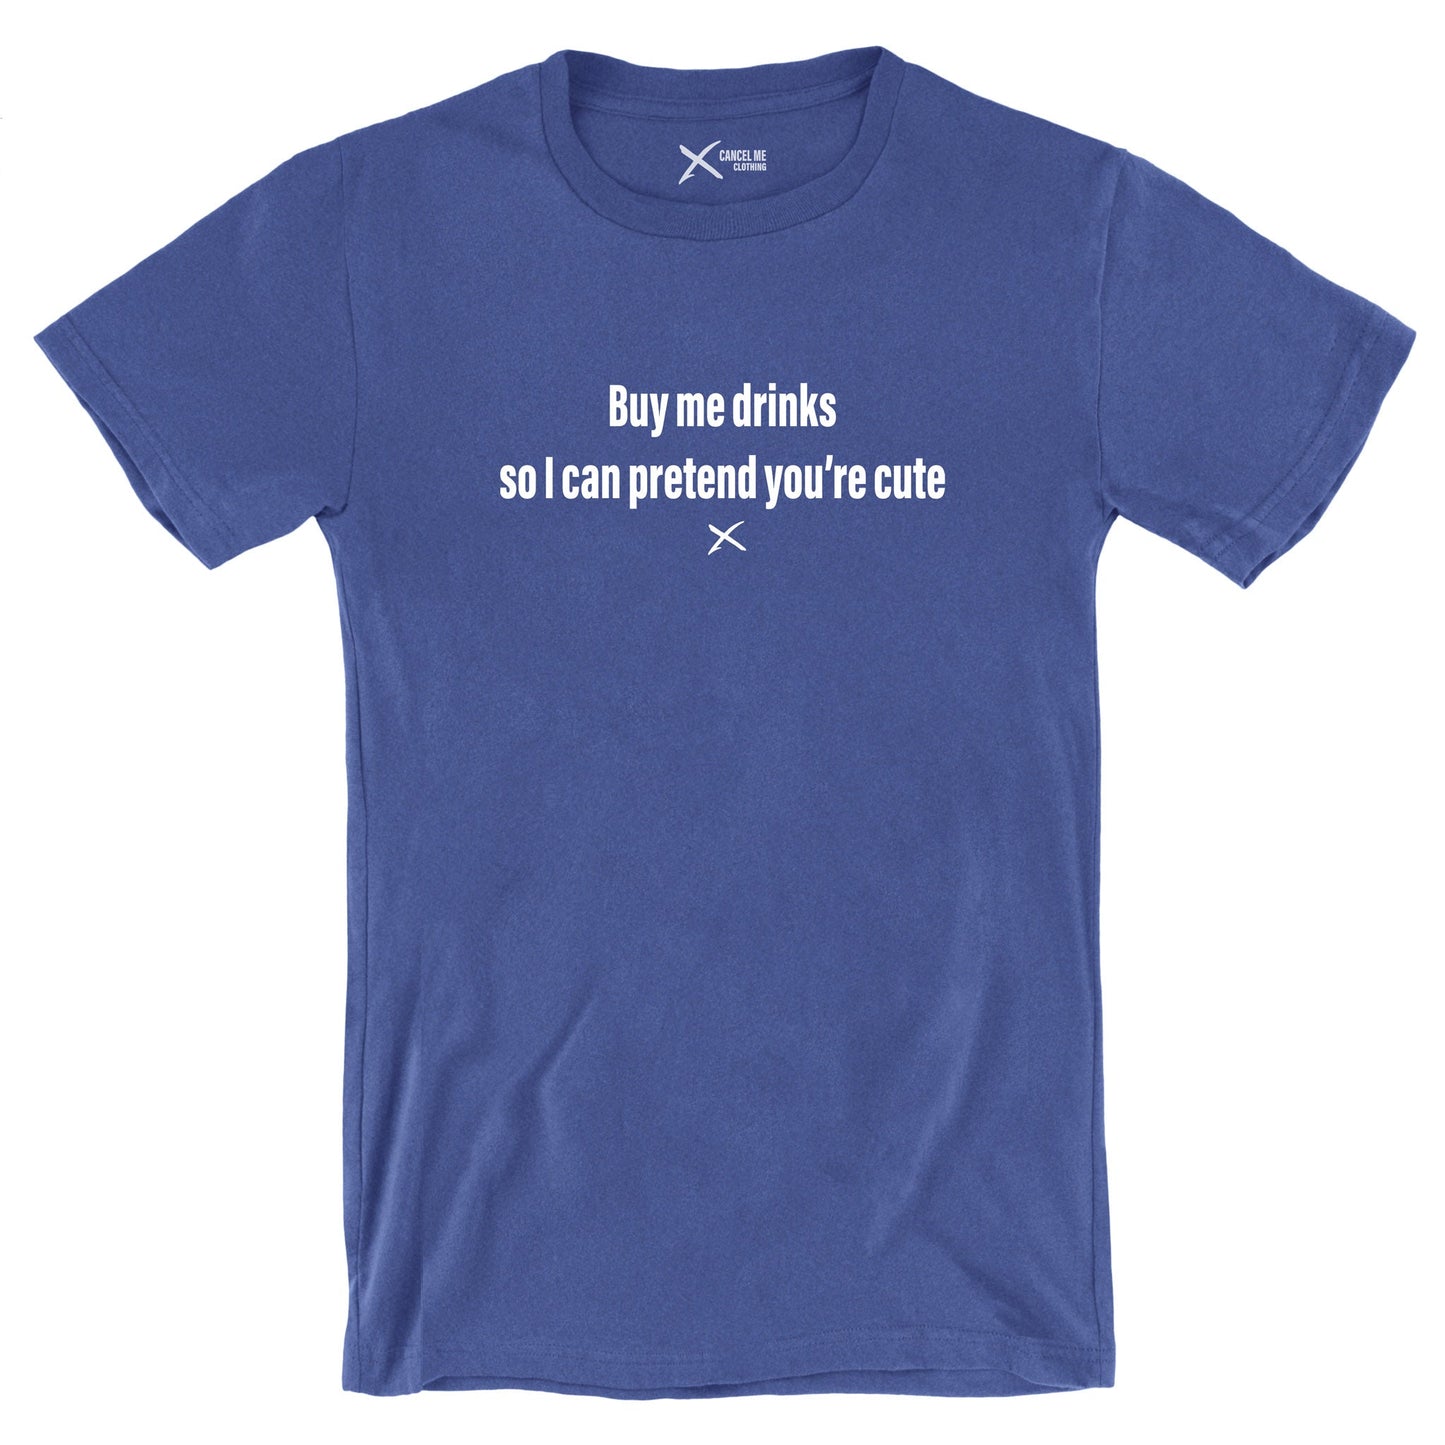 Buy me drinks so I can pretend you're cute - Shirt